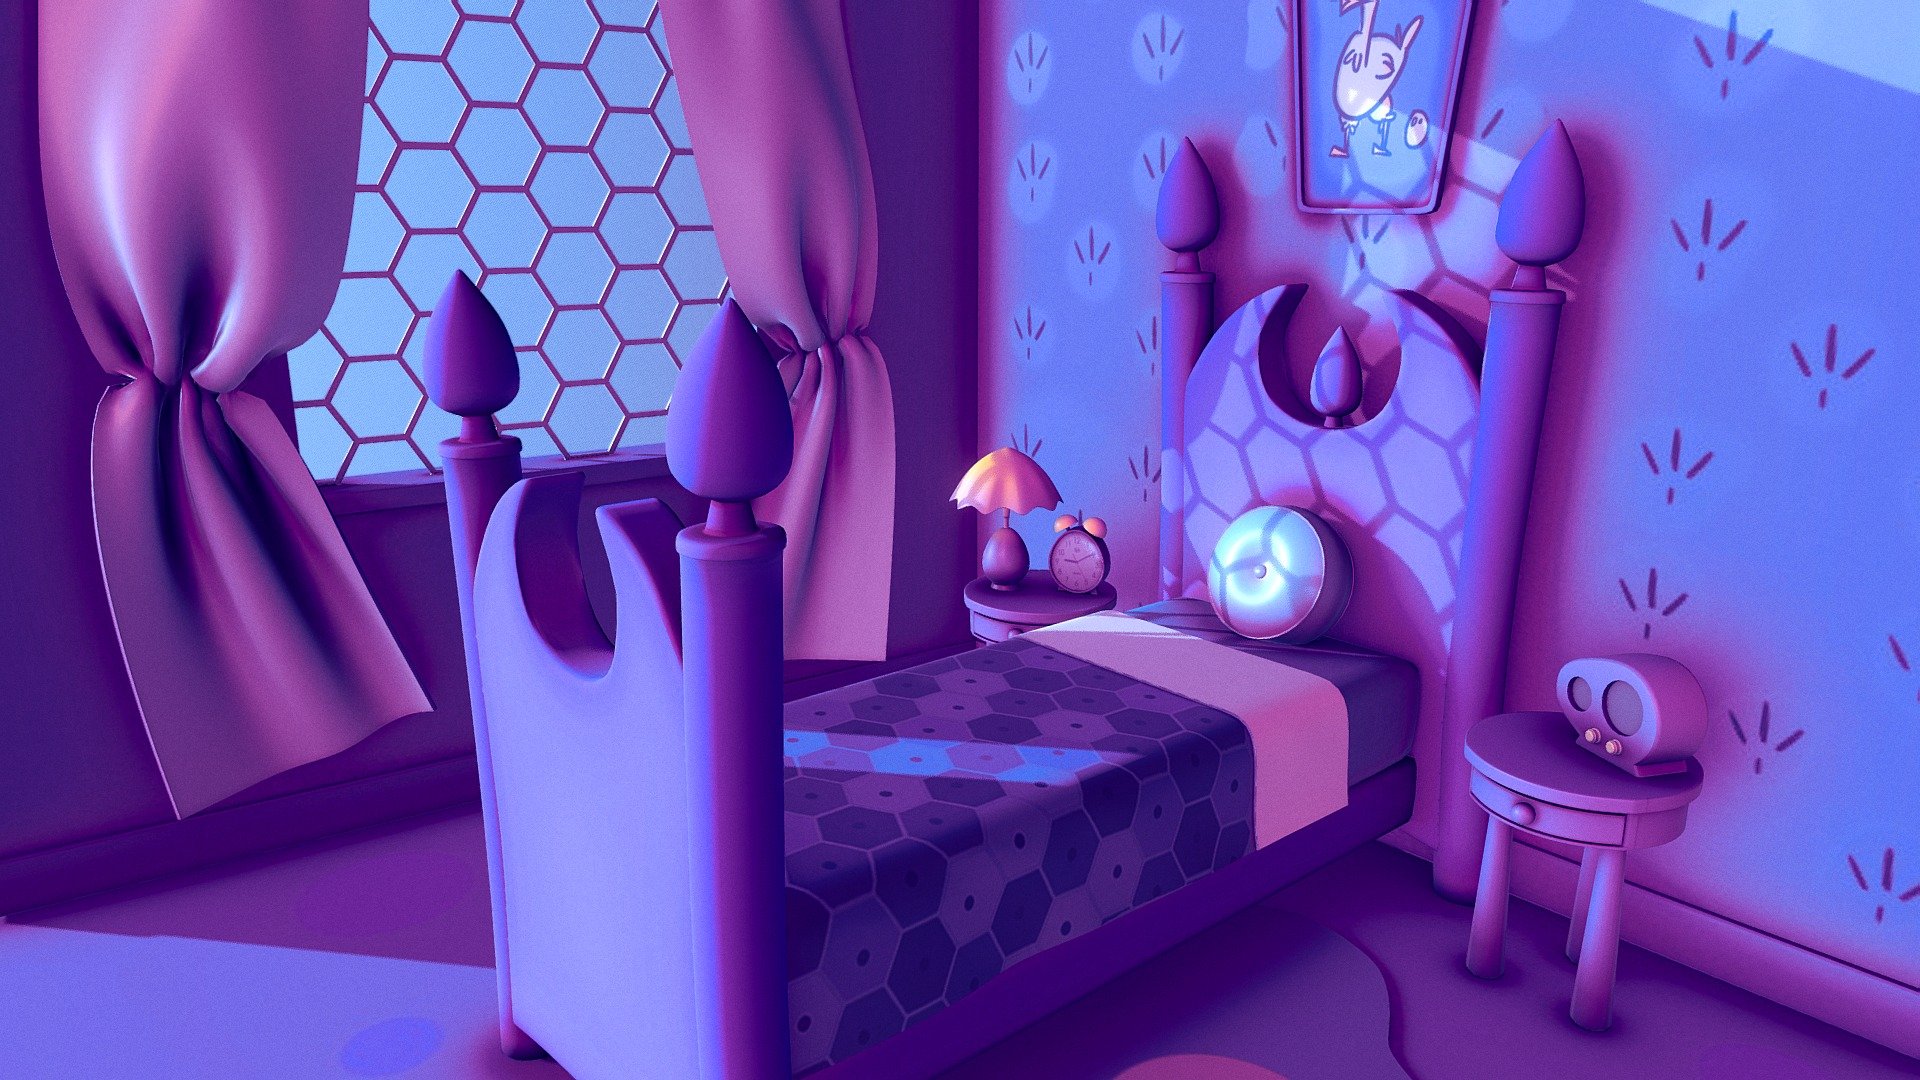 Chicken Cartoon Room

Based on Concept by :
Ian Gooding
https://www.imdb.com/name/nm0328951/ - Chicken Cartoon Room - 3D model by Maxence Rouillet (@maxencerouillet) 3d model